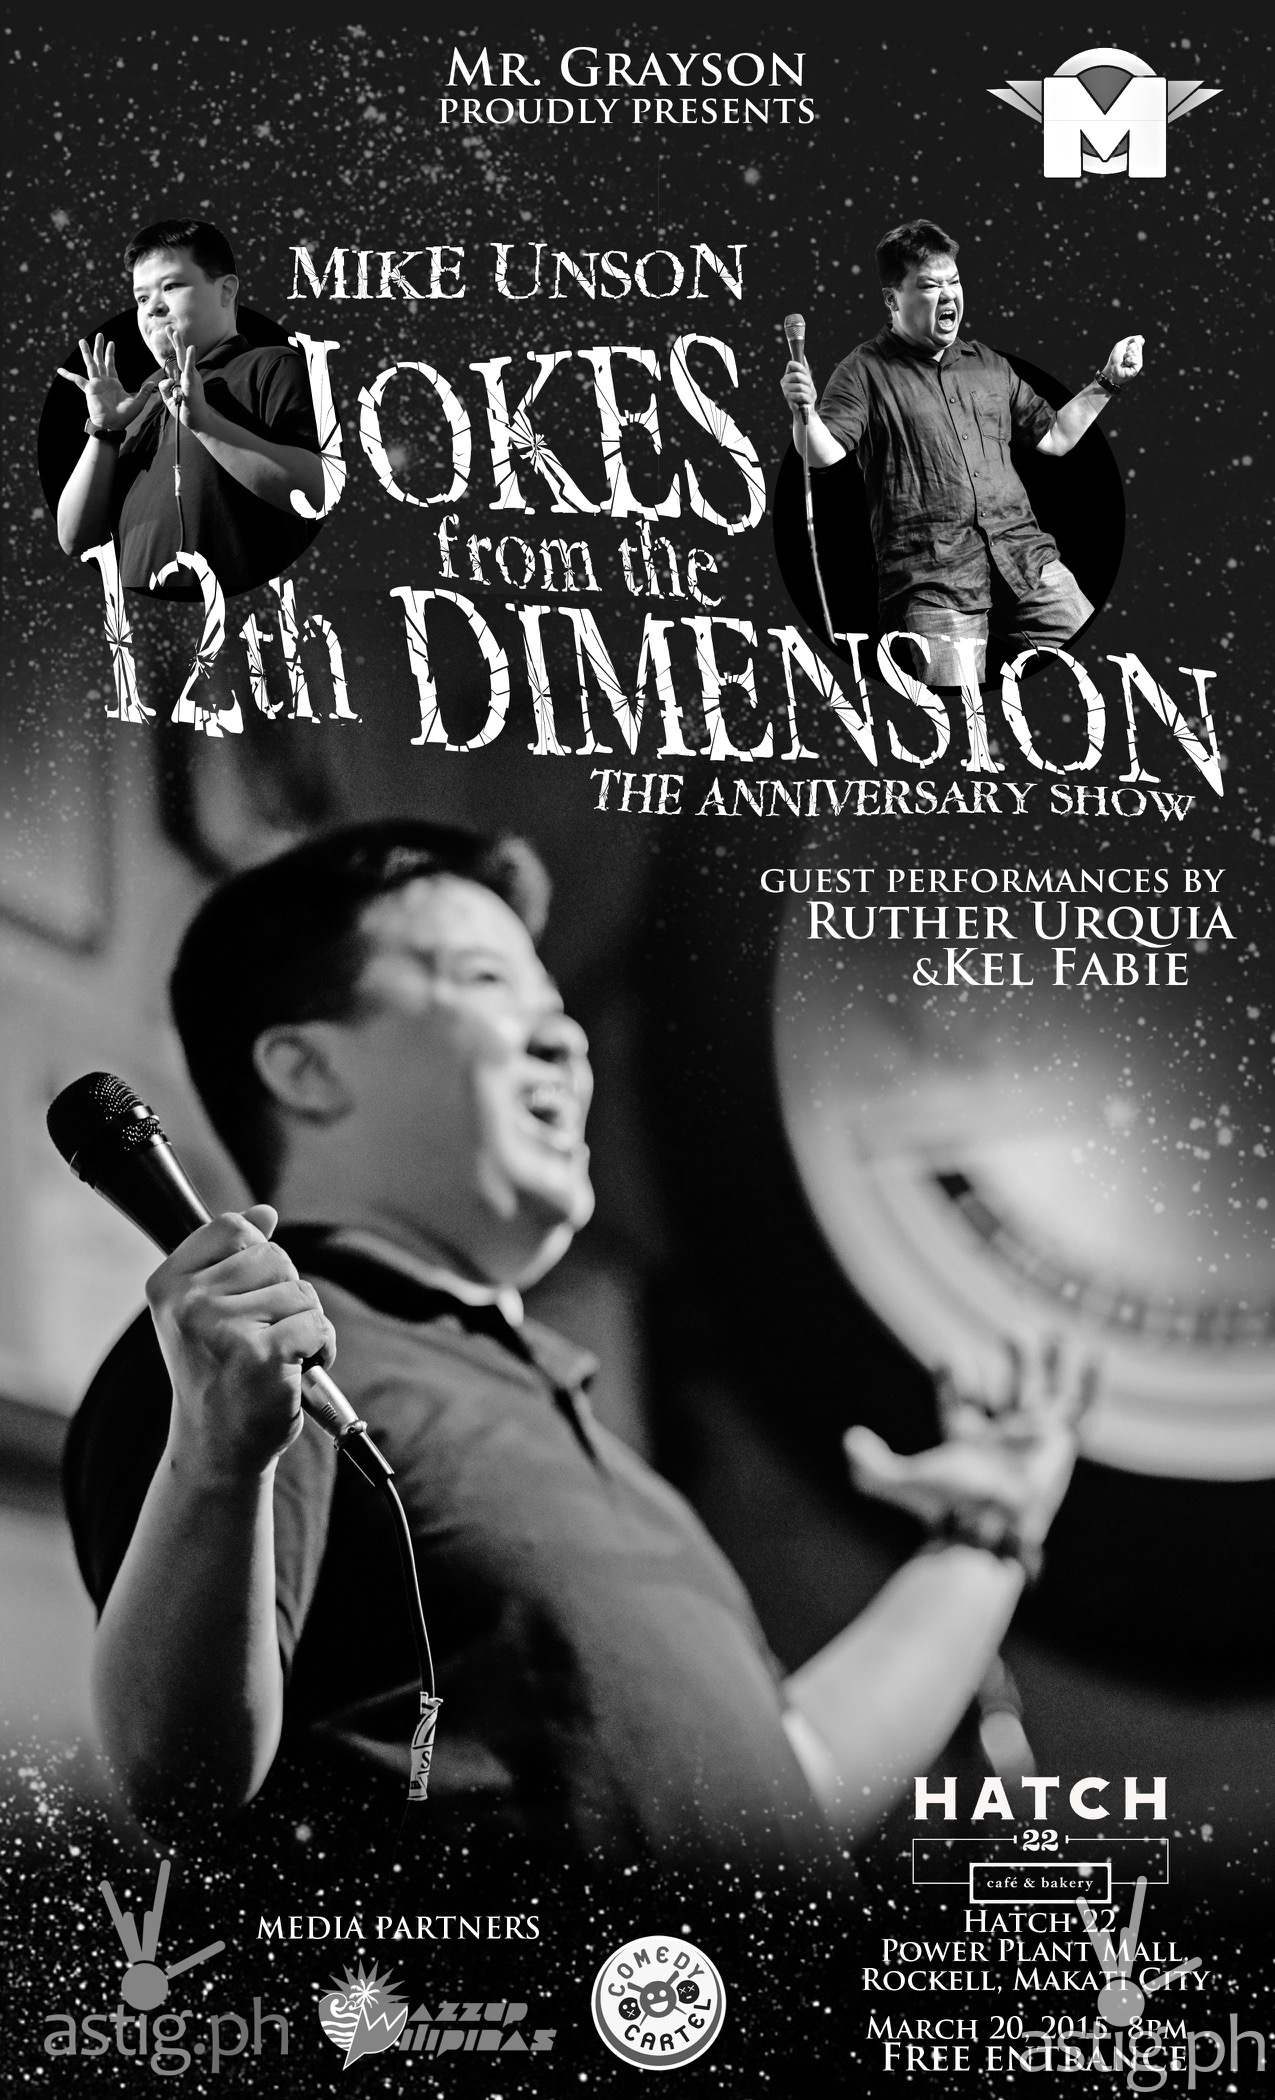 Mike Unson Jokes from the 12th Dimension The Anniversary Show